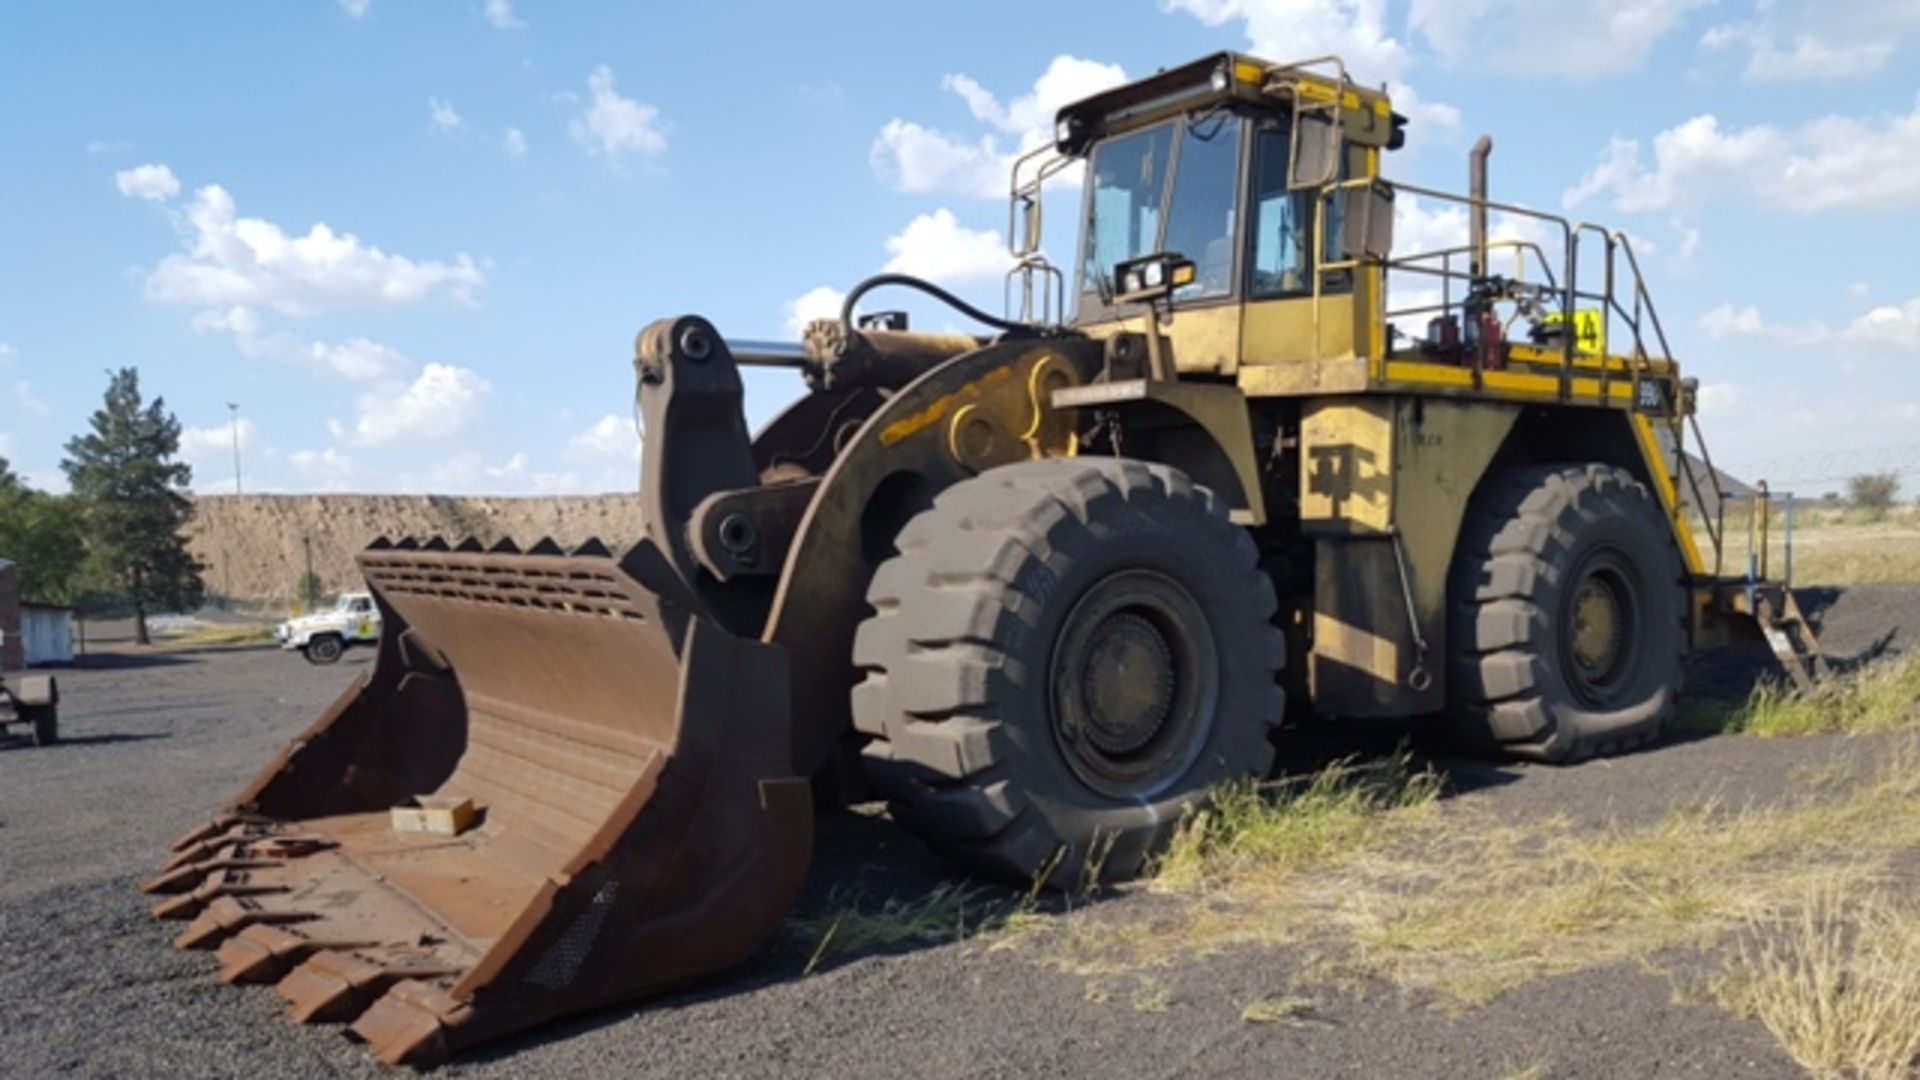 2007 CAT FRONT END LOADER, NON RUNNER (LOCATED IN HOTAZEL, NC) - Image 3 of 10